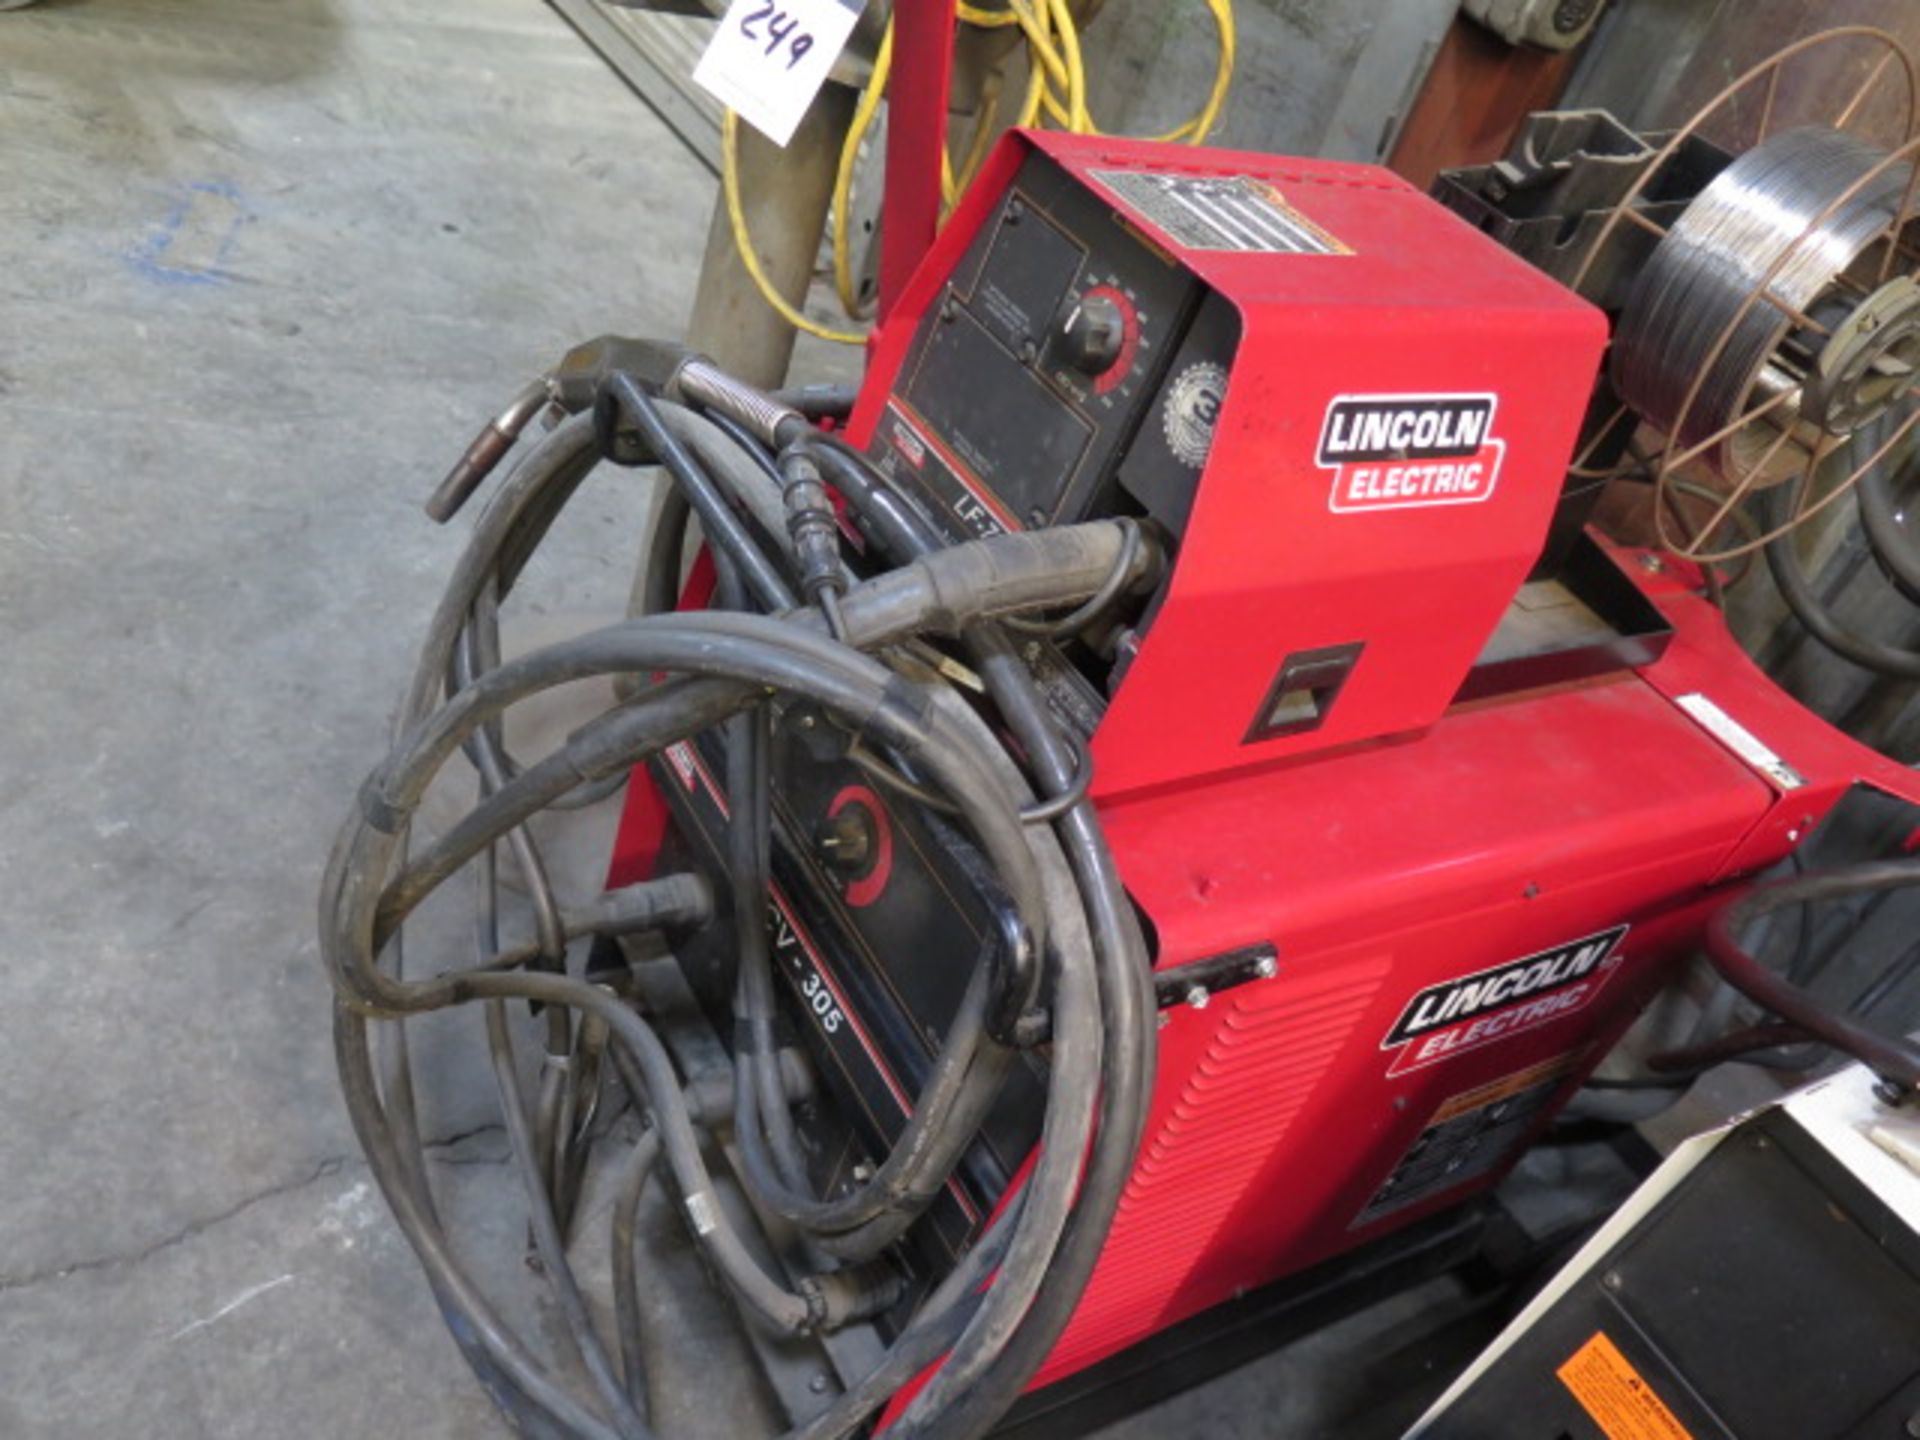 Lincoln CV-305 Arc Welding Power Source w/ LF-72 Wire Feeder - Image 2 of 7